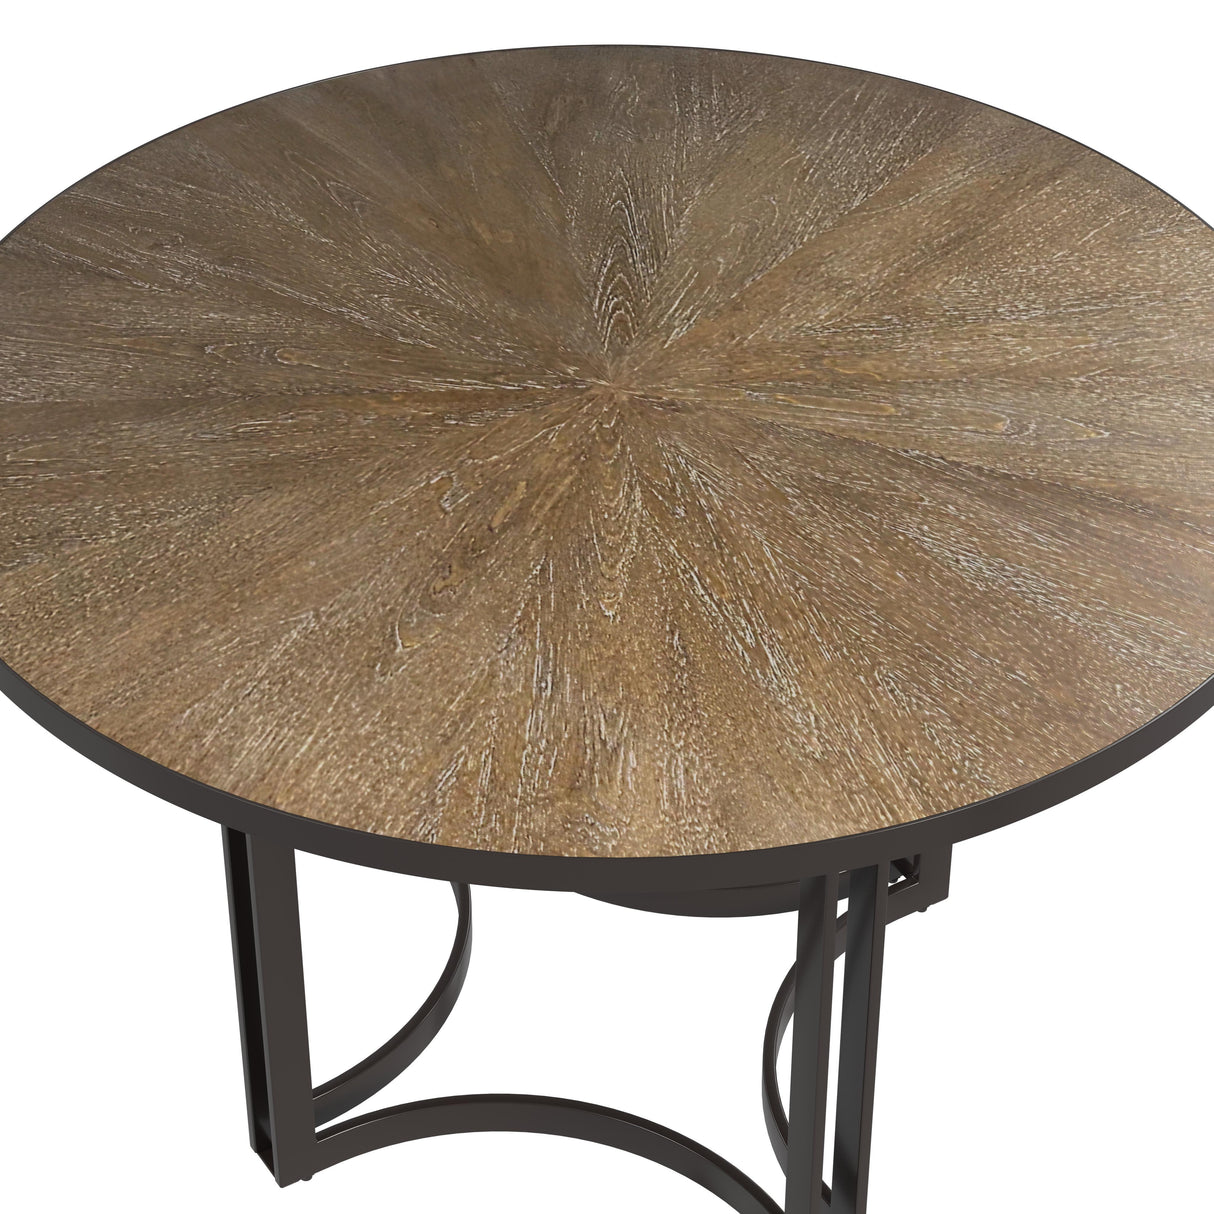 Trucco - Dining Table - Black